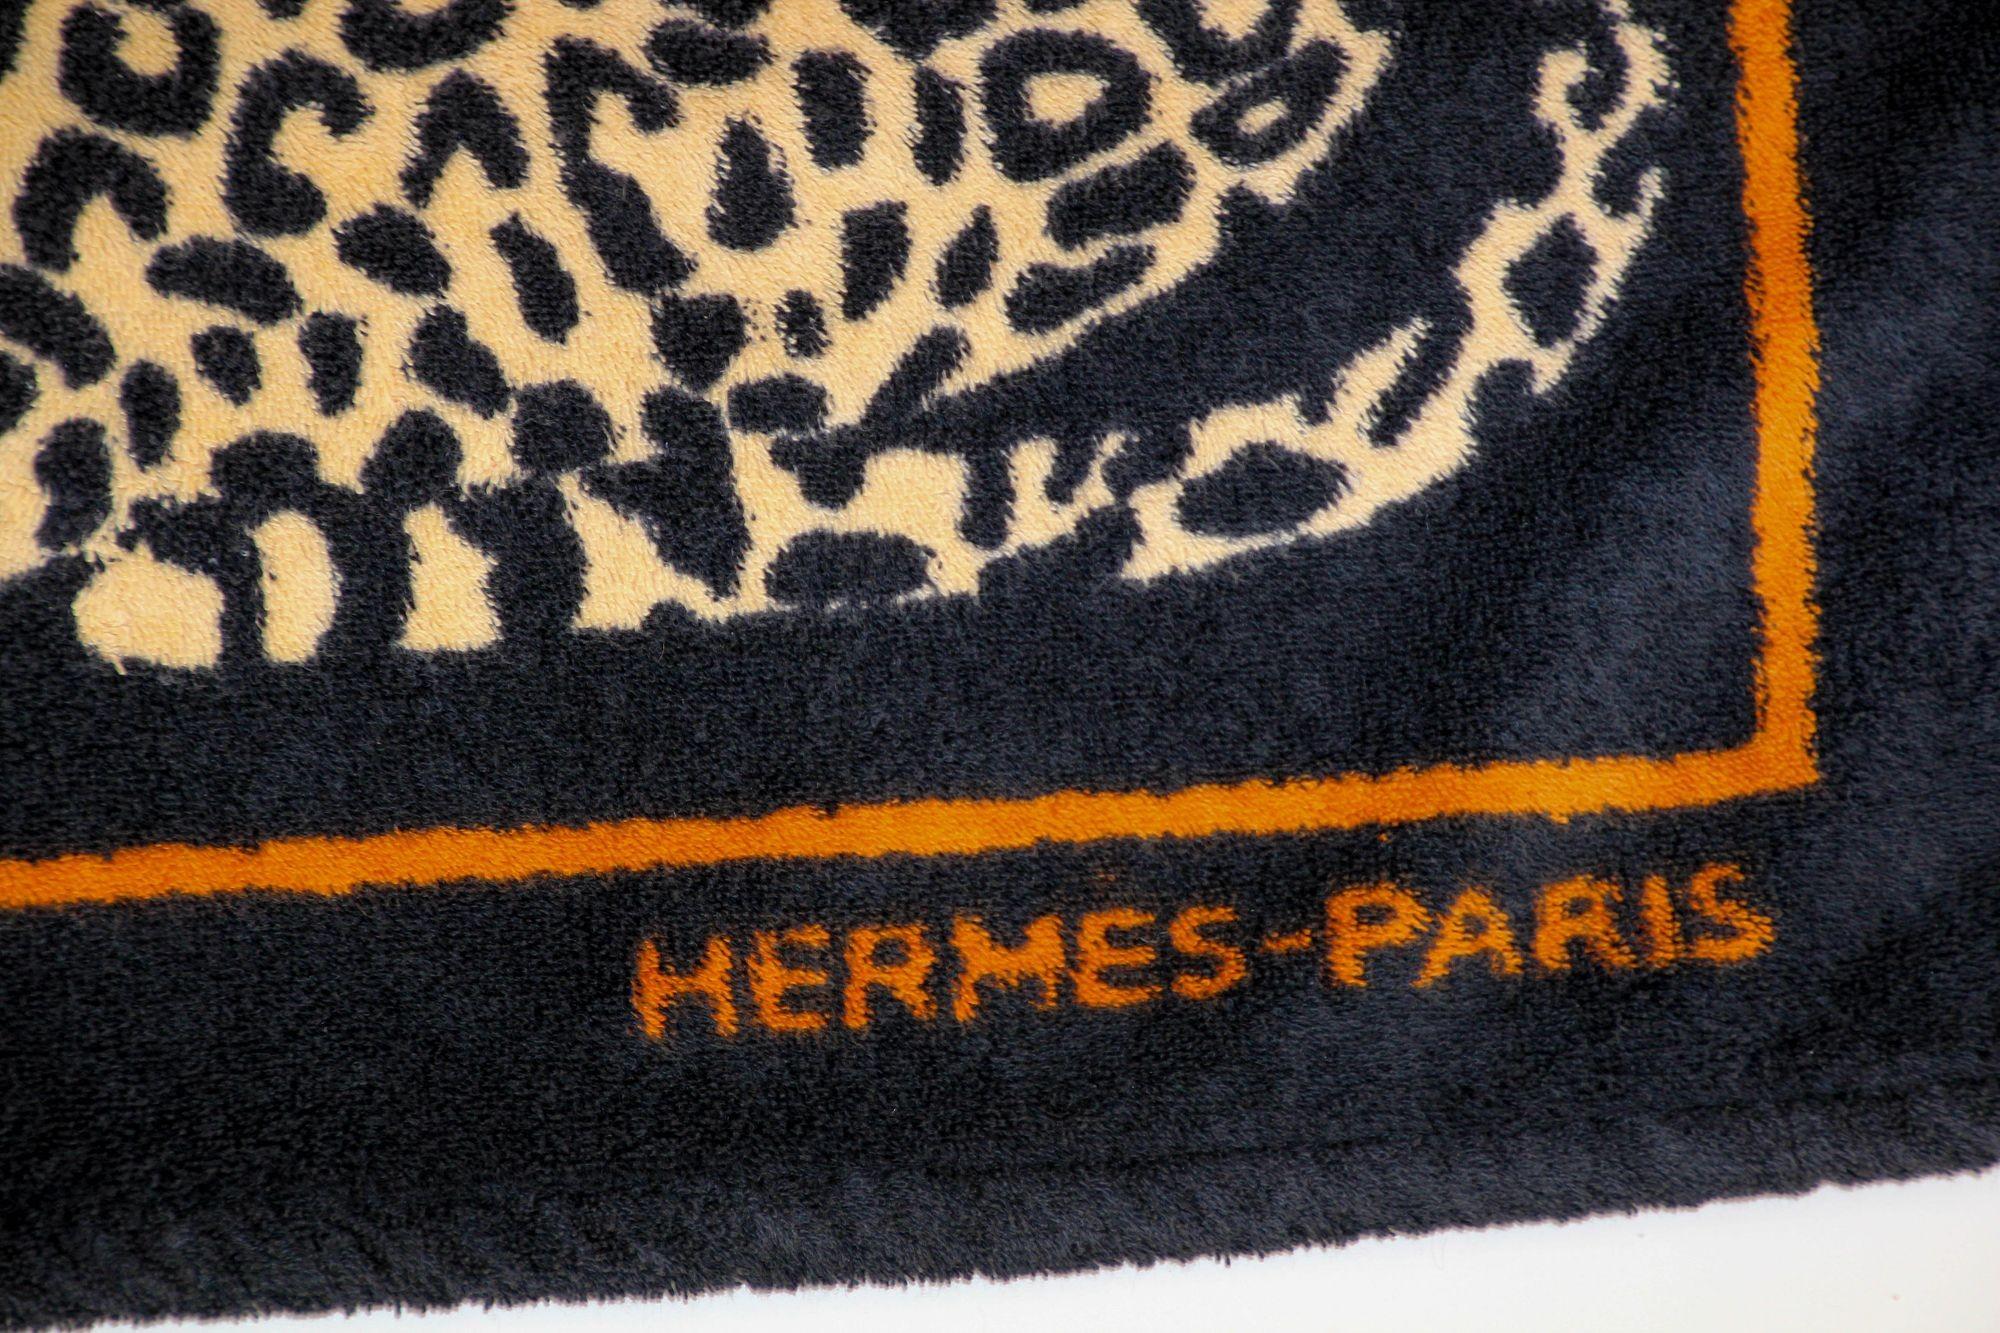 Bohemian Hermes Paris Small Bath Mat with a Leopard Print in Black and Orange